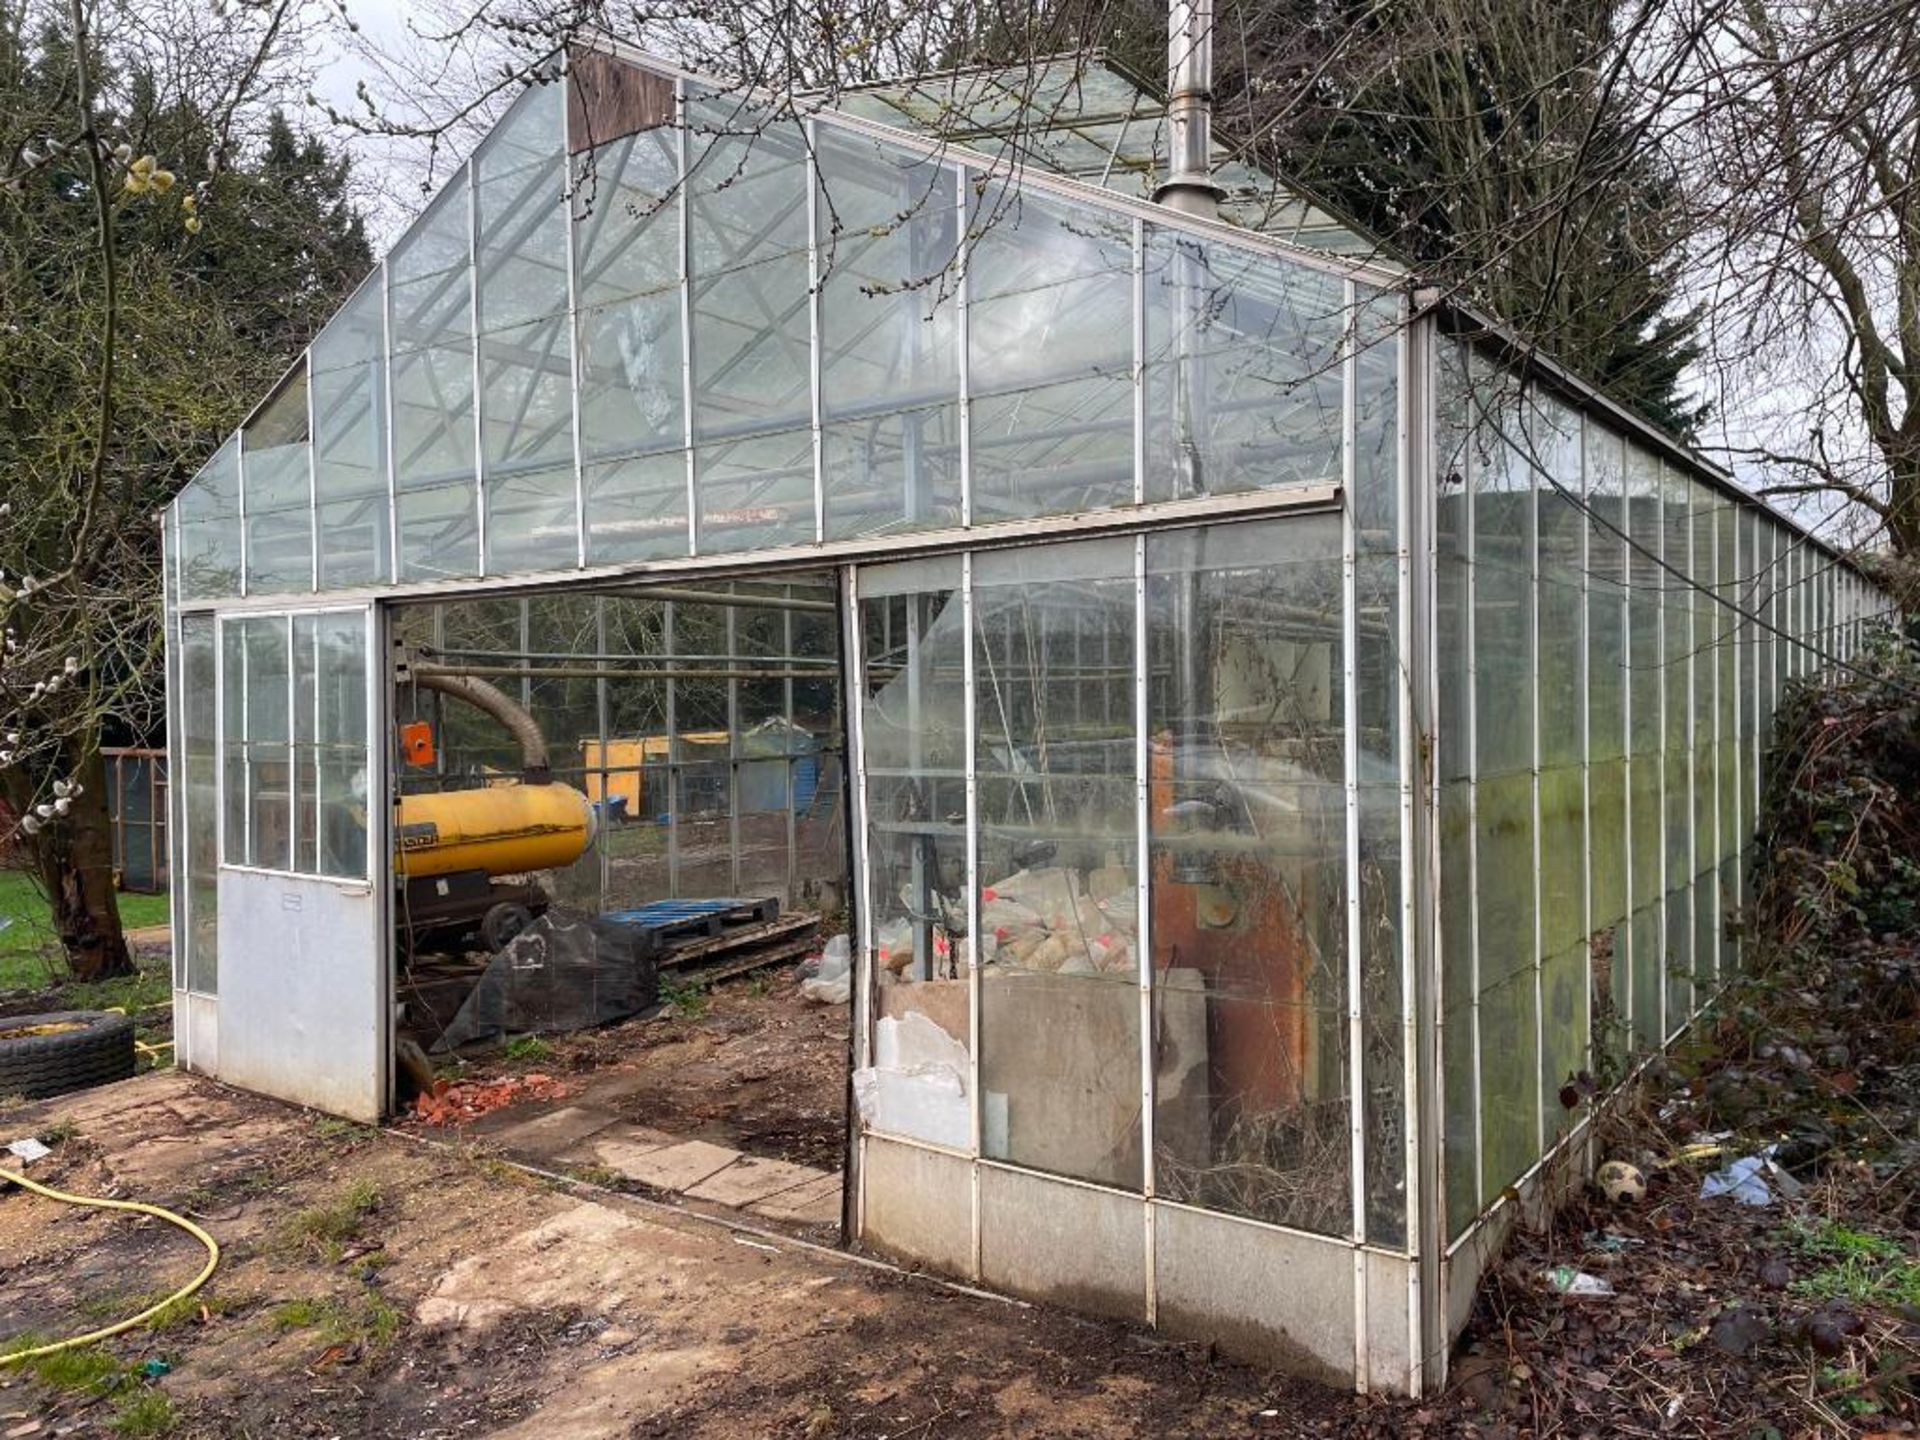 Robinson 6.6m x 15m glasshouse with manual opening vents. Sold in situ, buyer to remove